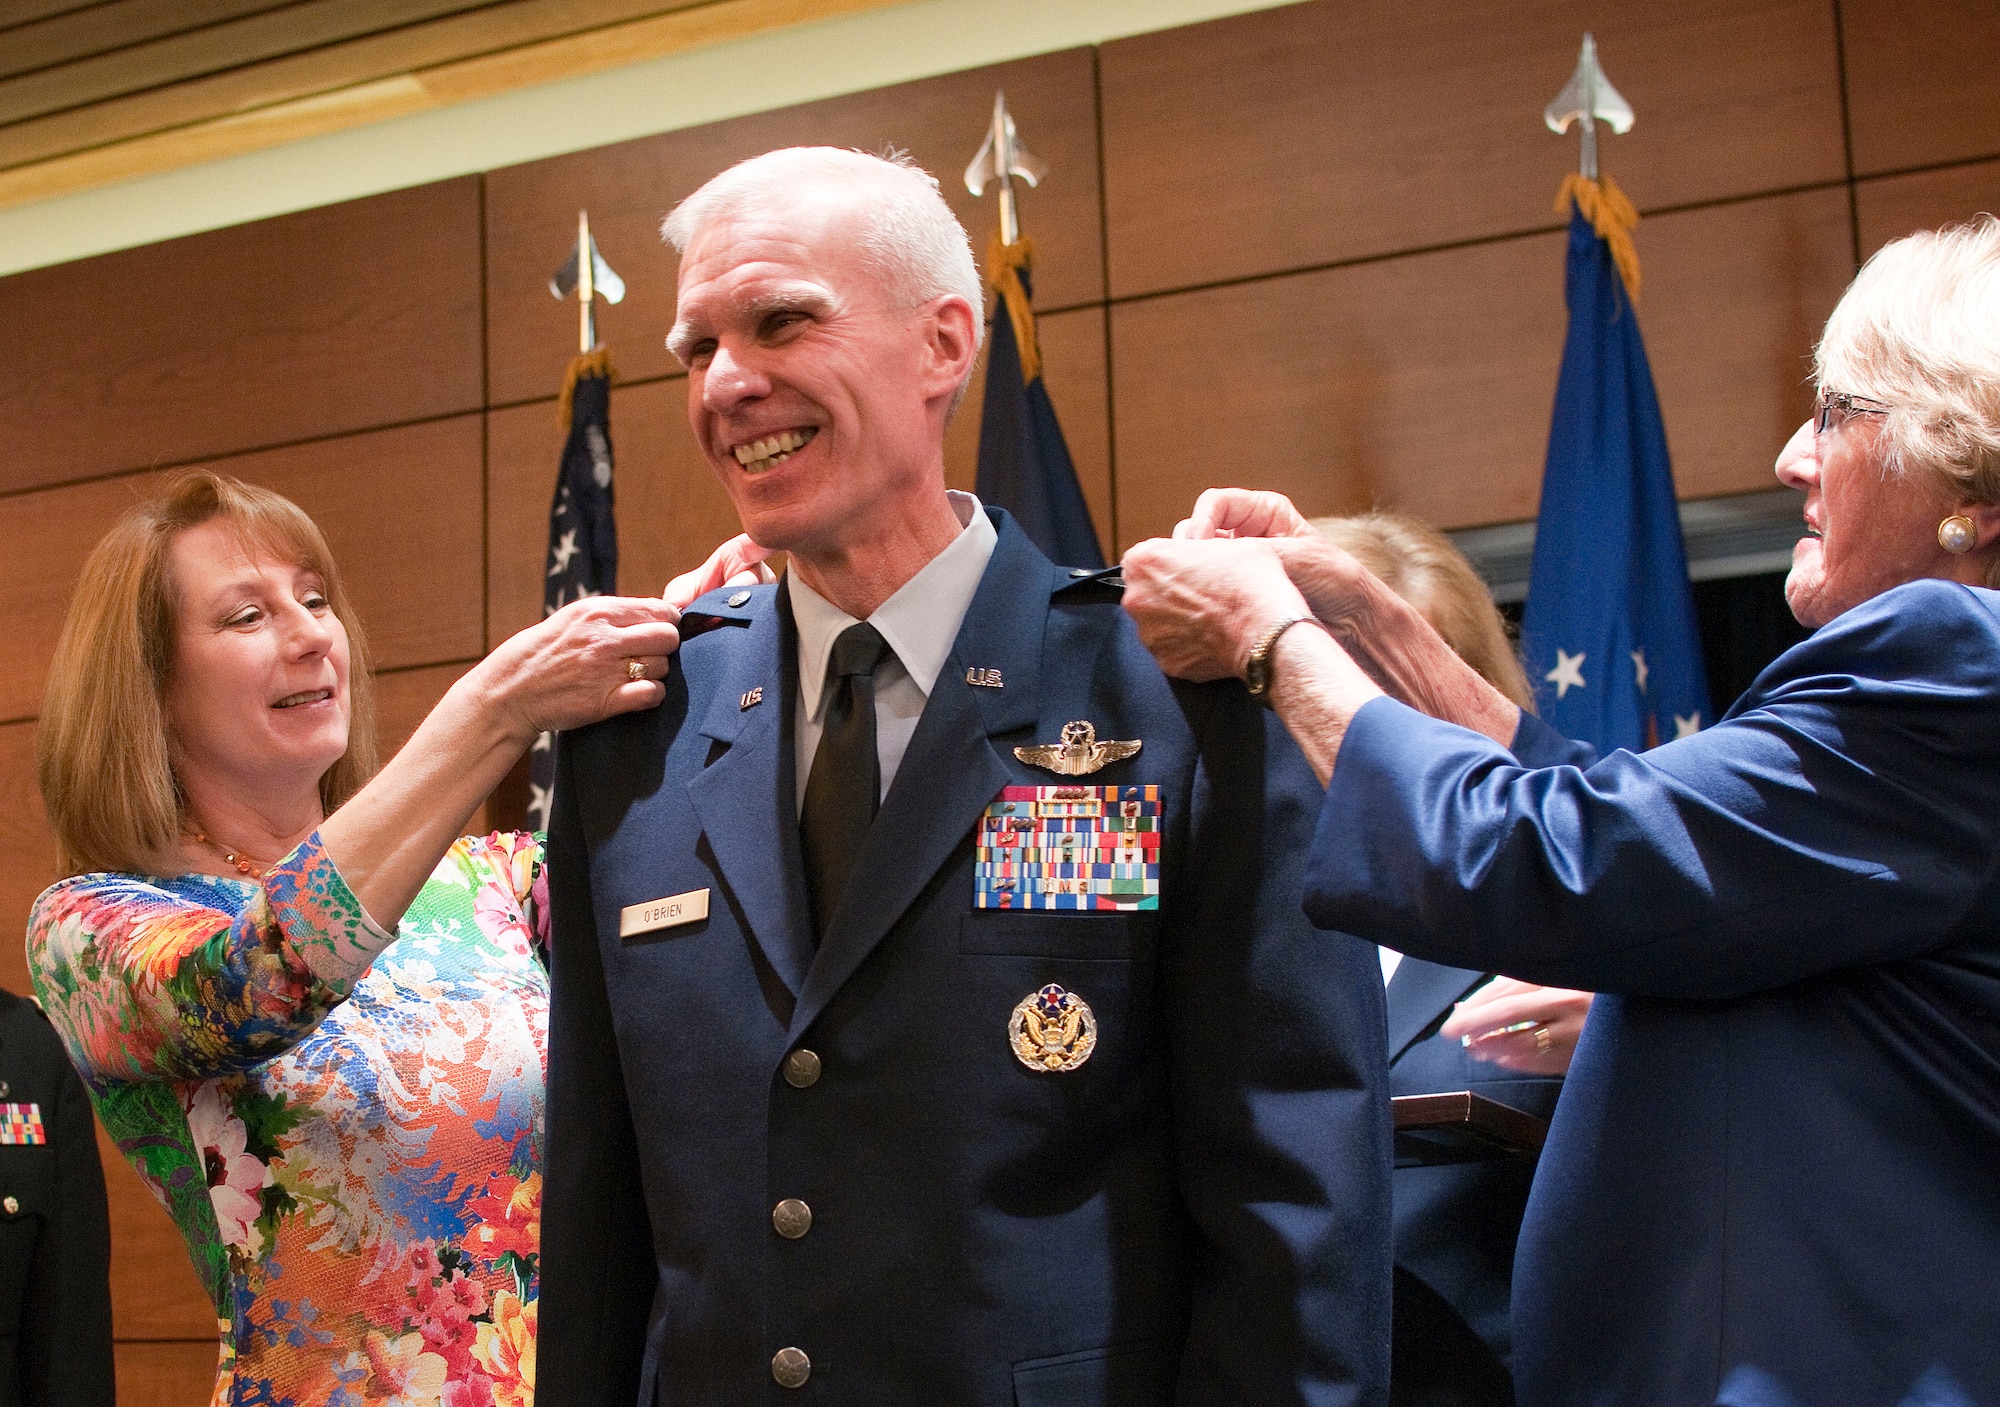 JOINT BASE ELMENDORF RICHARDSON, Alaska -- Timothy P. O'Brien, Alaska's assistant adjutant general for air and commander of the Alaska Air National Guard, receives his general's stars from his wife, Catherine O'Brien, and his mother, Donna O'Brien, at a promotion ceremony here March 2, 2014. O'Brien is responsible for ensuring the training and equipping of the approximately 2,200 men and women of the Alaska Air National Guard. National Guard photo by Tech. Sgt. Jennifer Theulen.